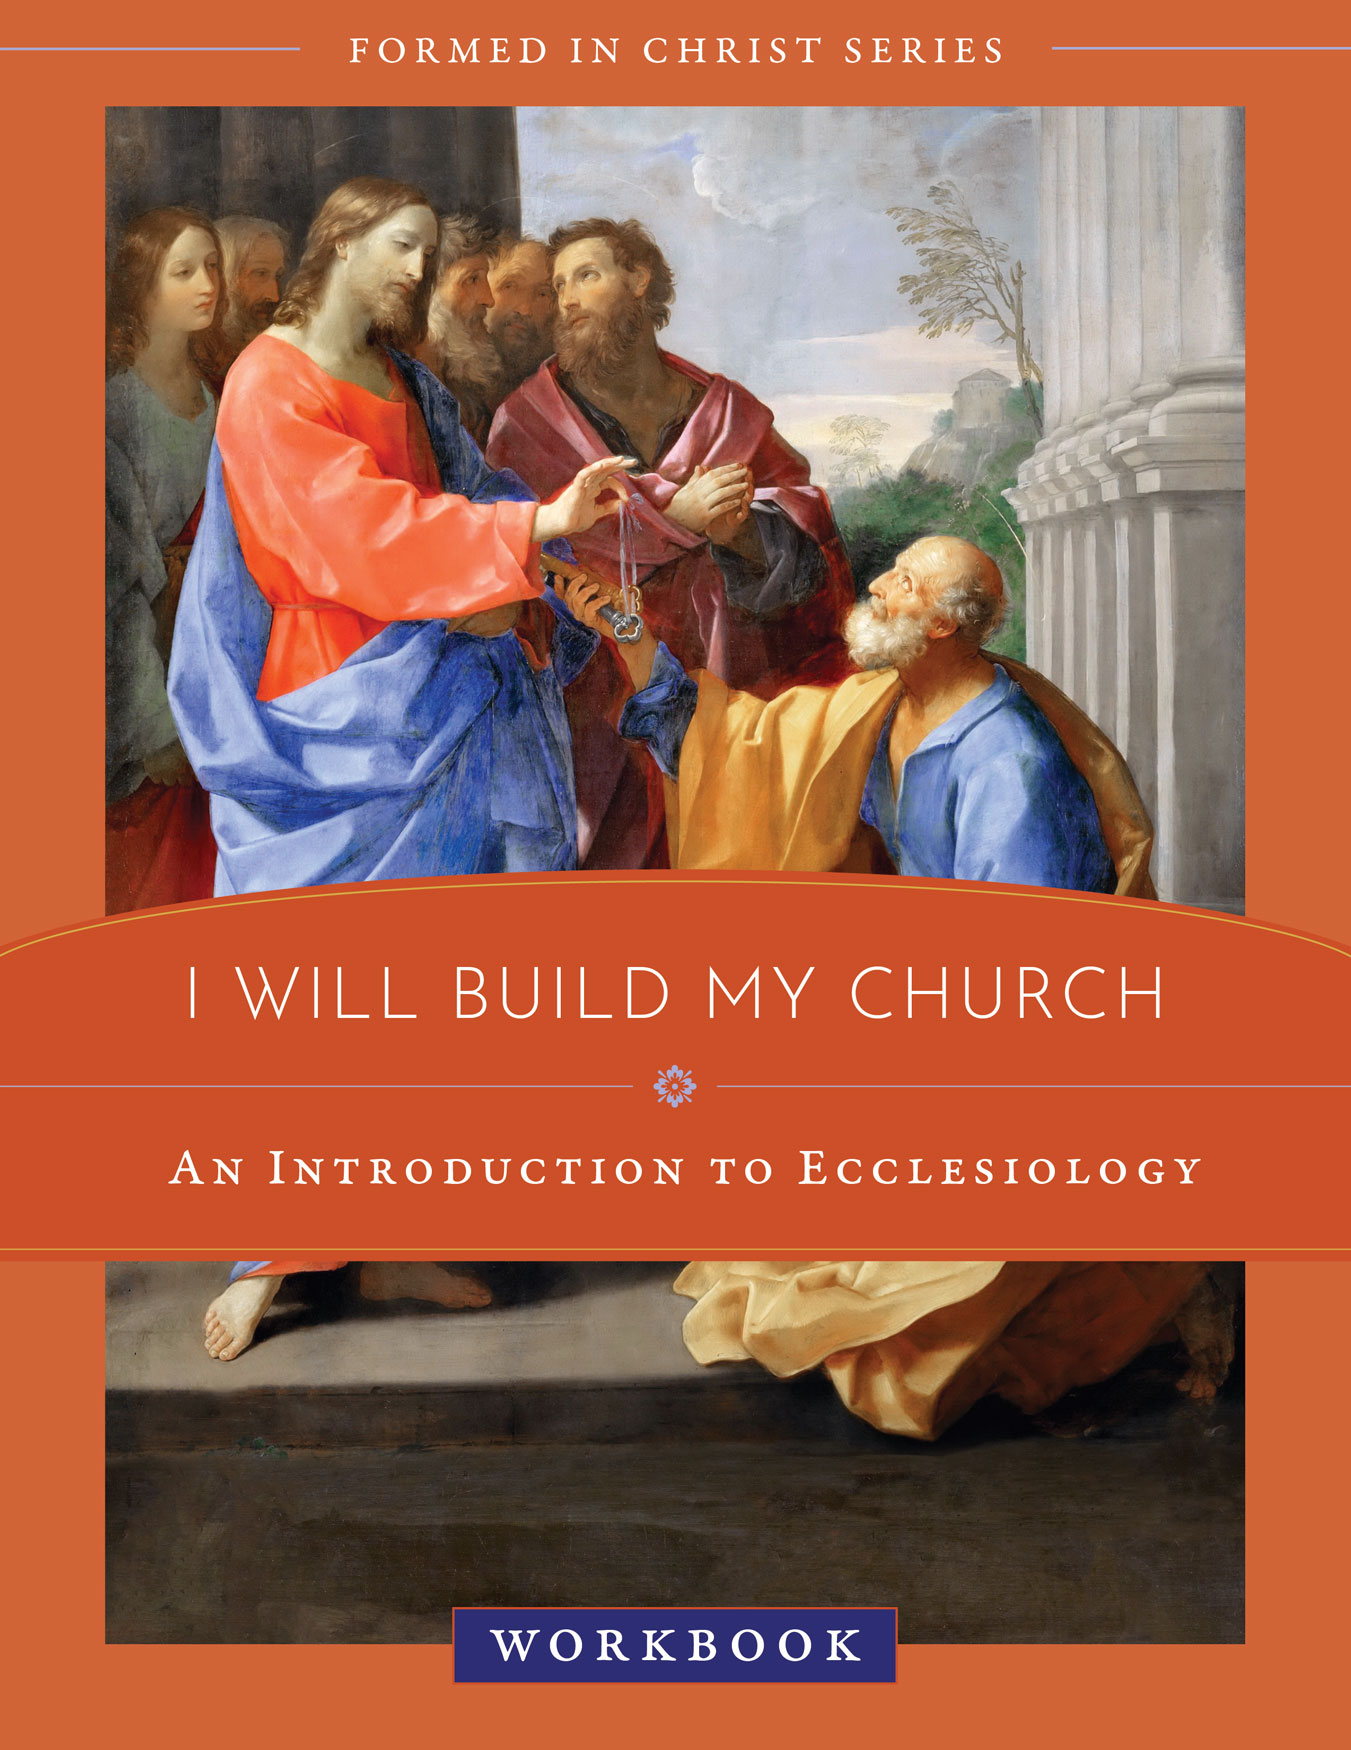 Formed in Christ I Will Build My Church Workbook